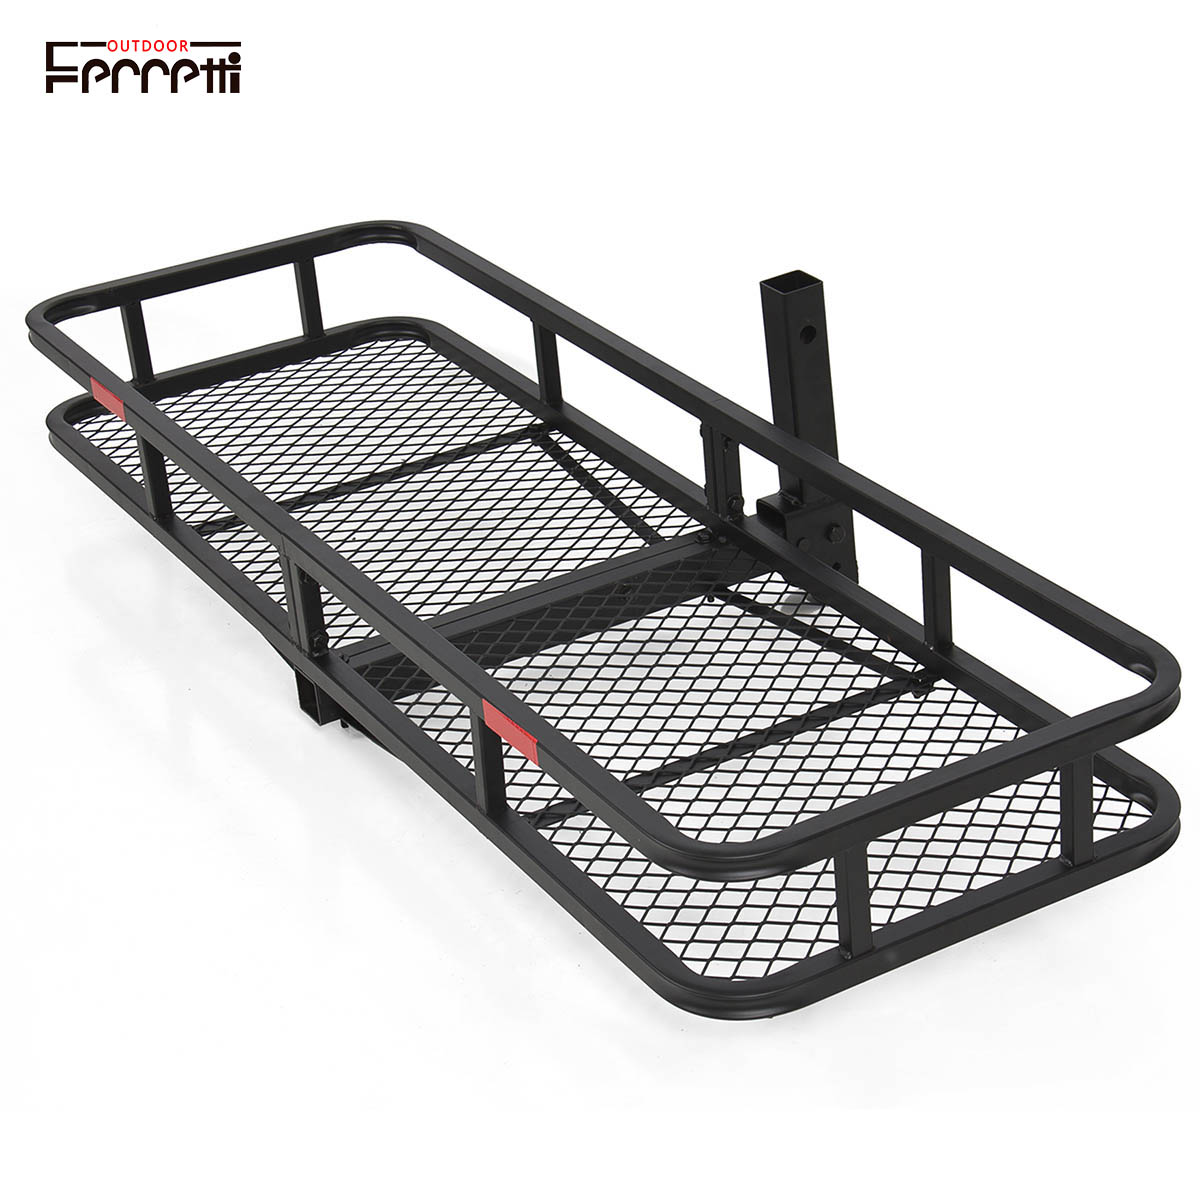 Folding,Hitch-mounted,basket-style cargo carrier